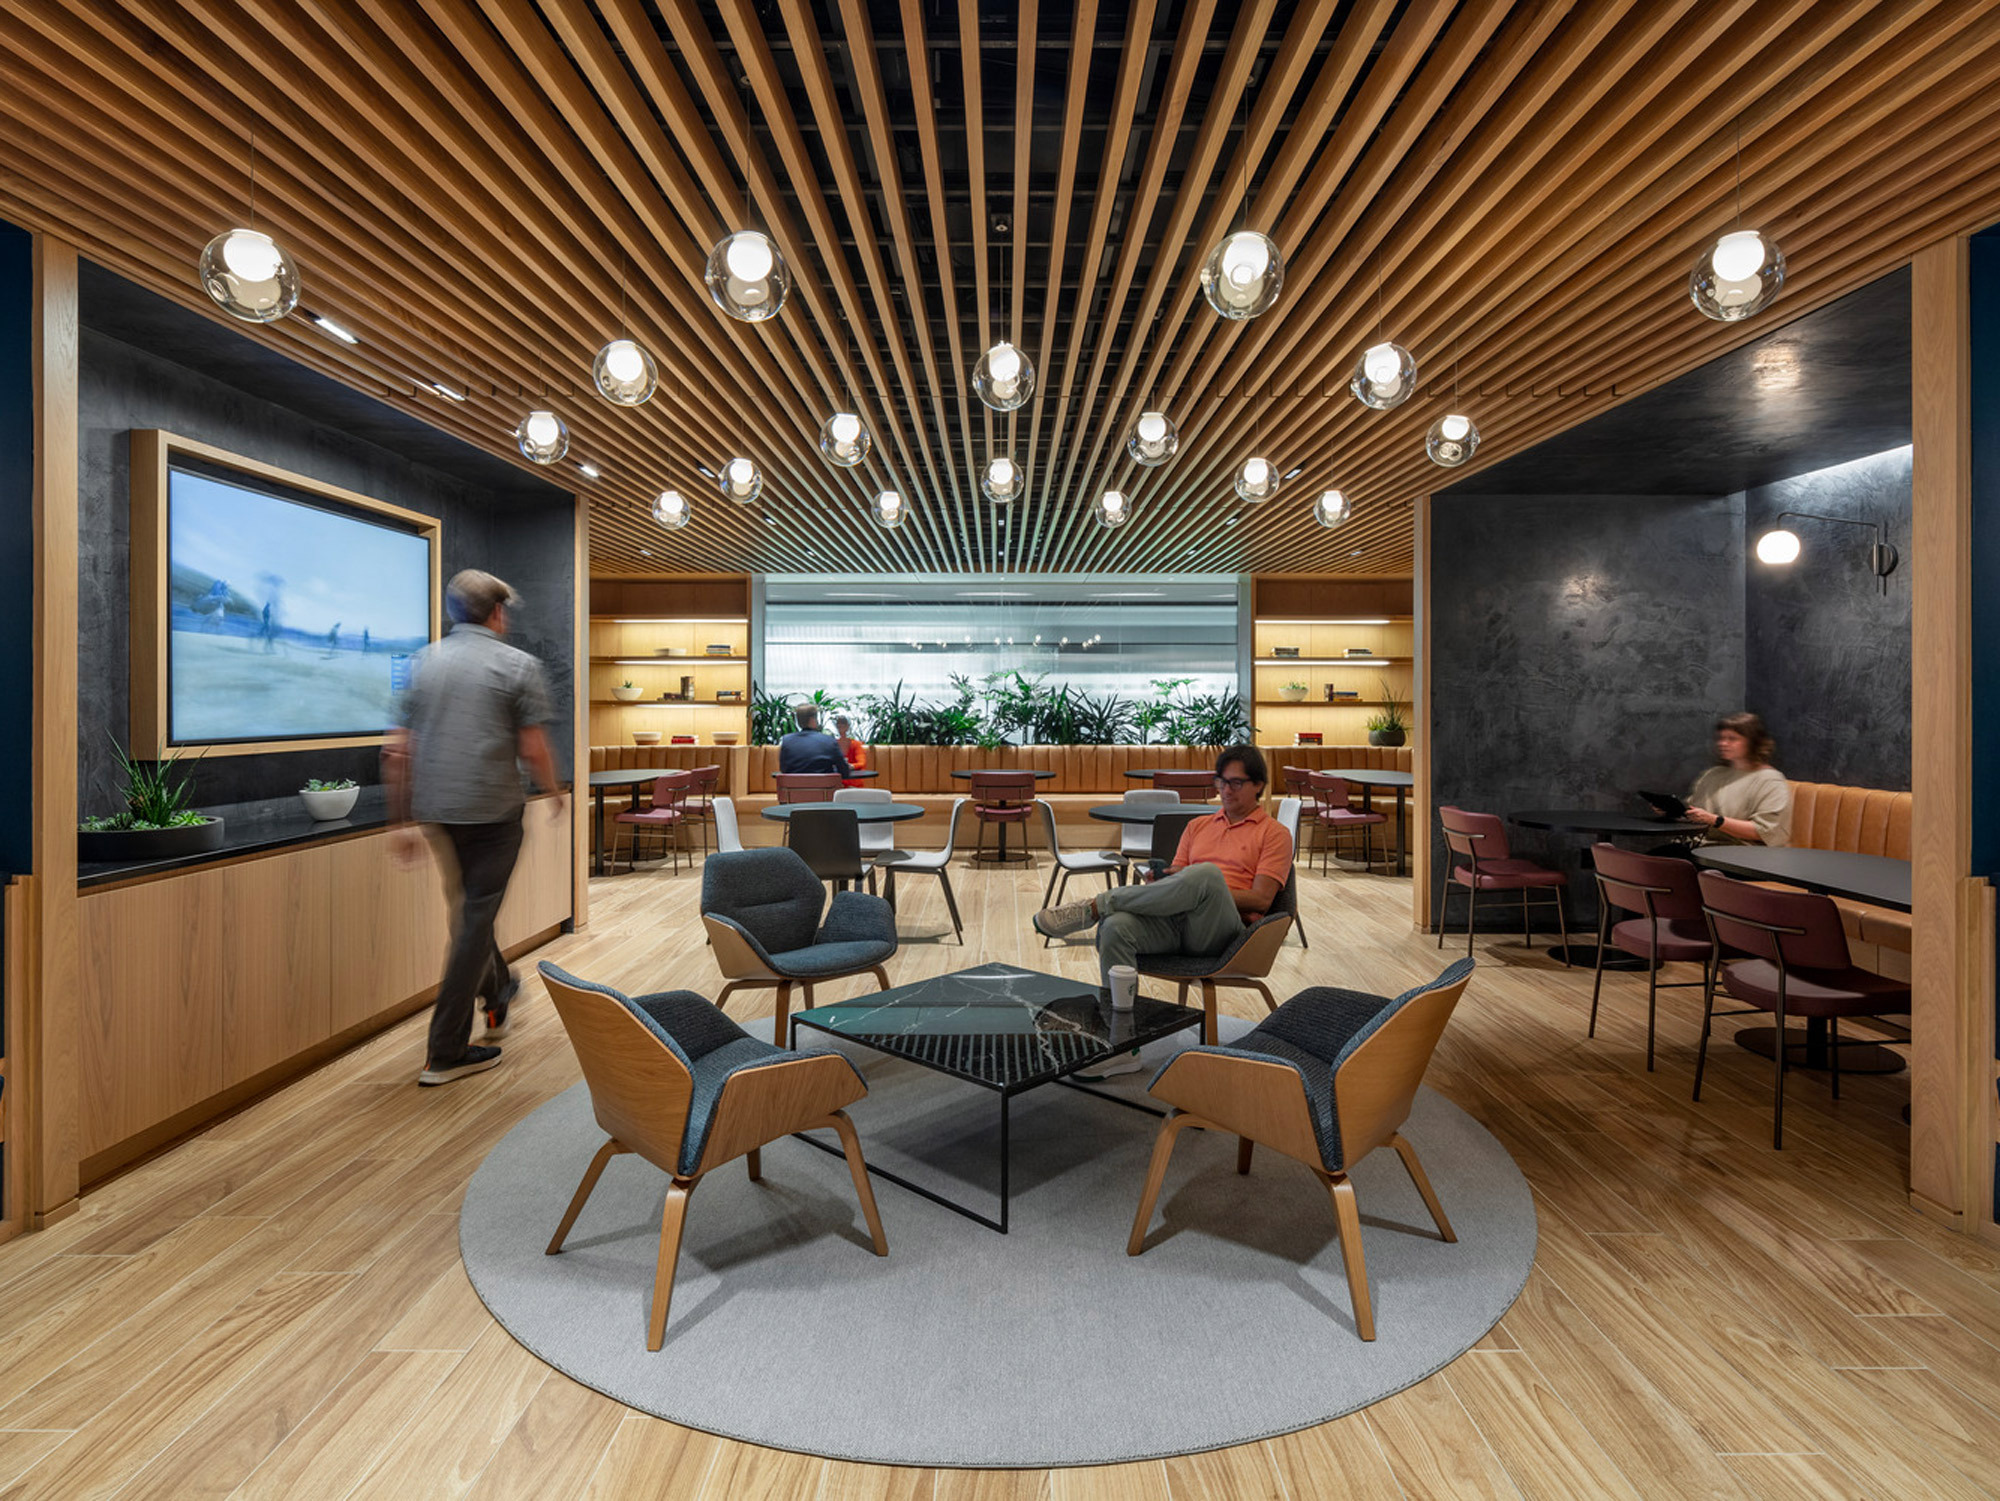 Modern office lounge with slatted wood ceiling and ambient globe lighting, complemented by mid-century-inspired furnishings, against a plant-filled window backdrop and textured dark wall accents.